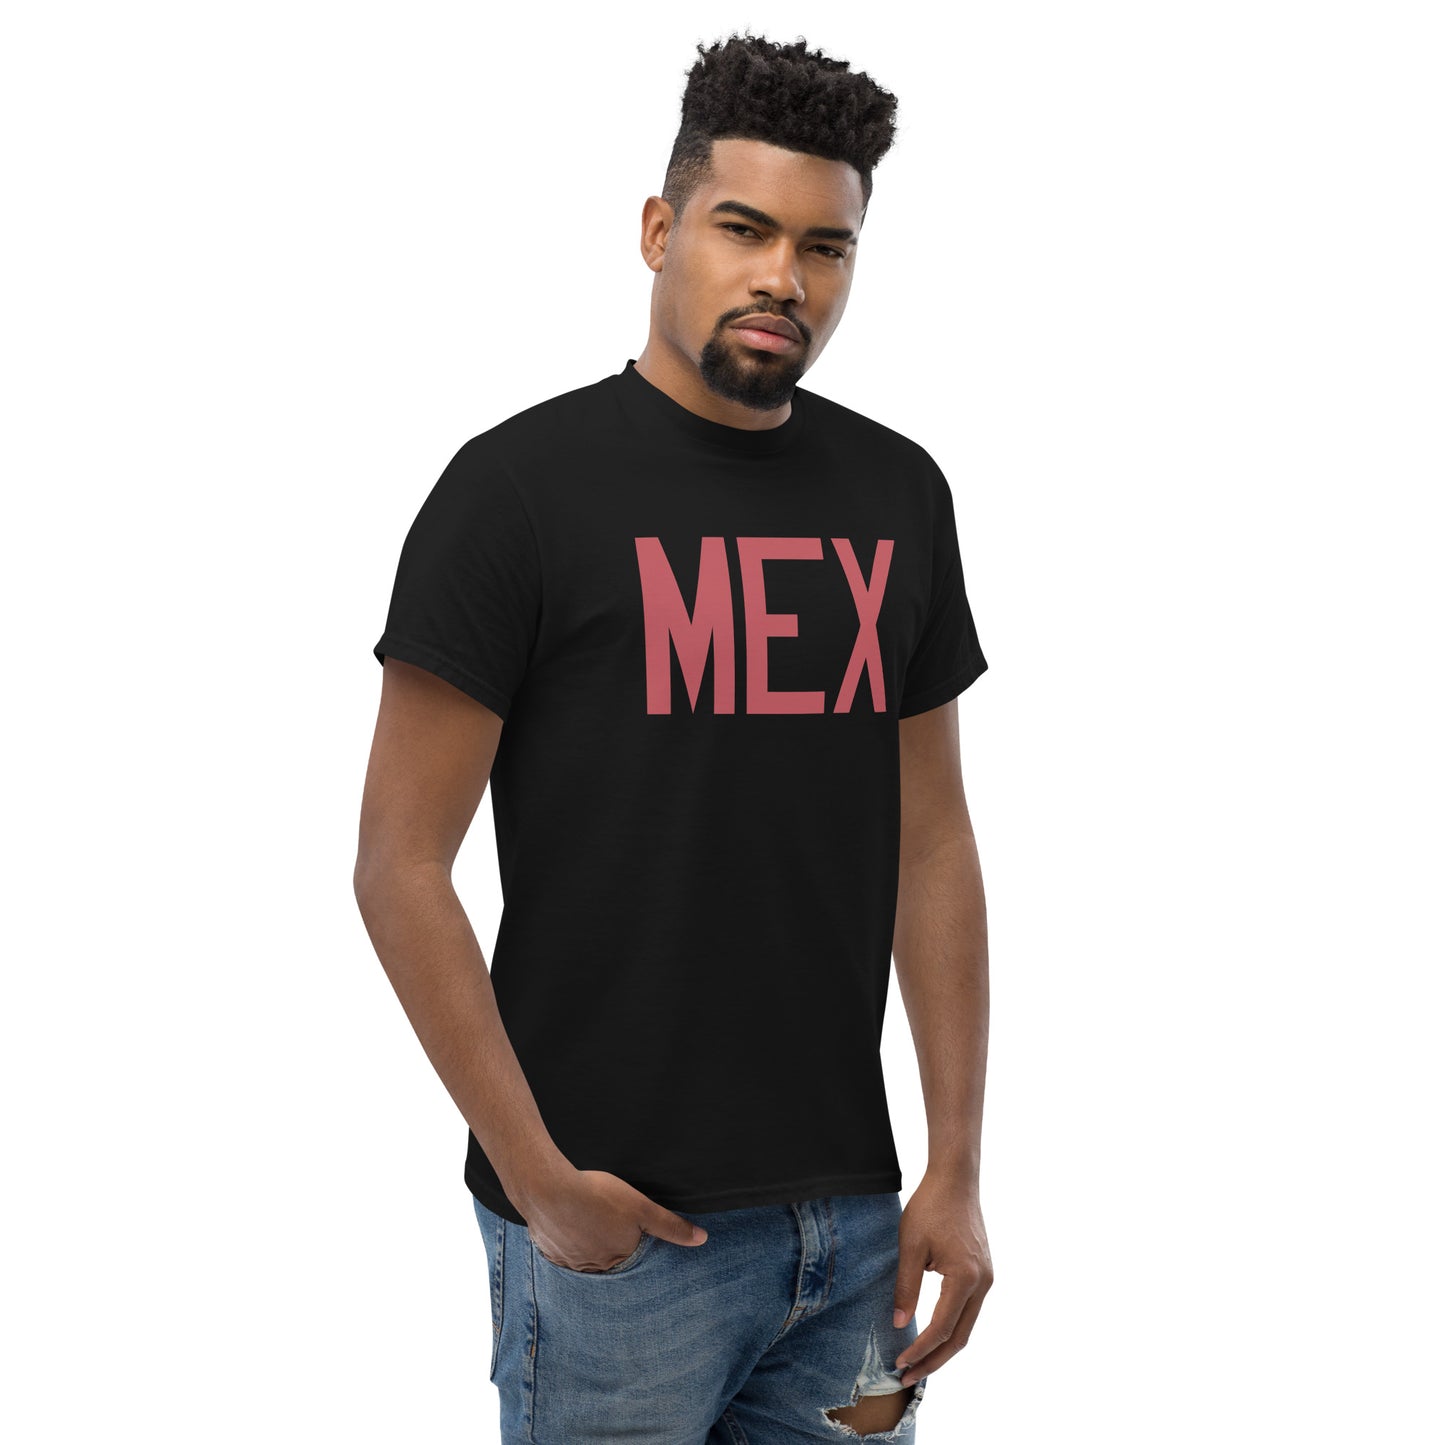 Aviation Enthusiast Men's Tee - Deep Pink Graphic • MEX Mexico City • YHM Designs - Image 08